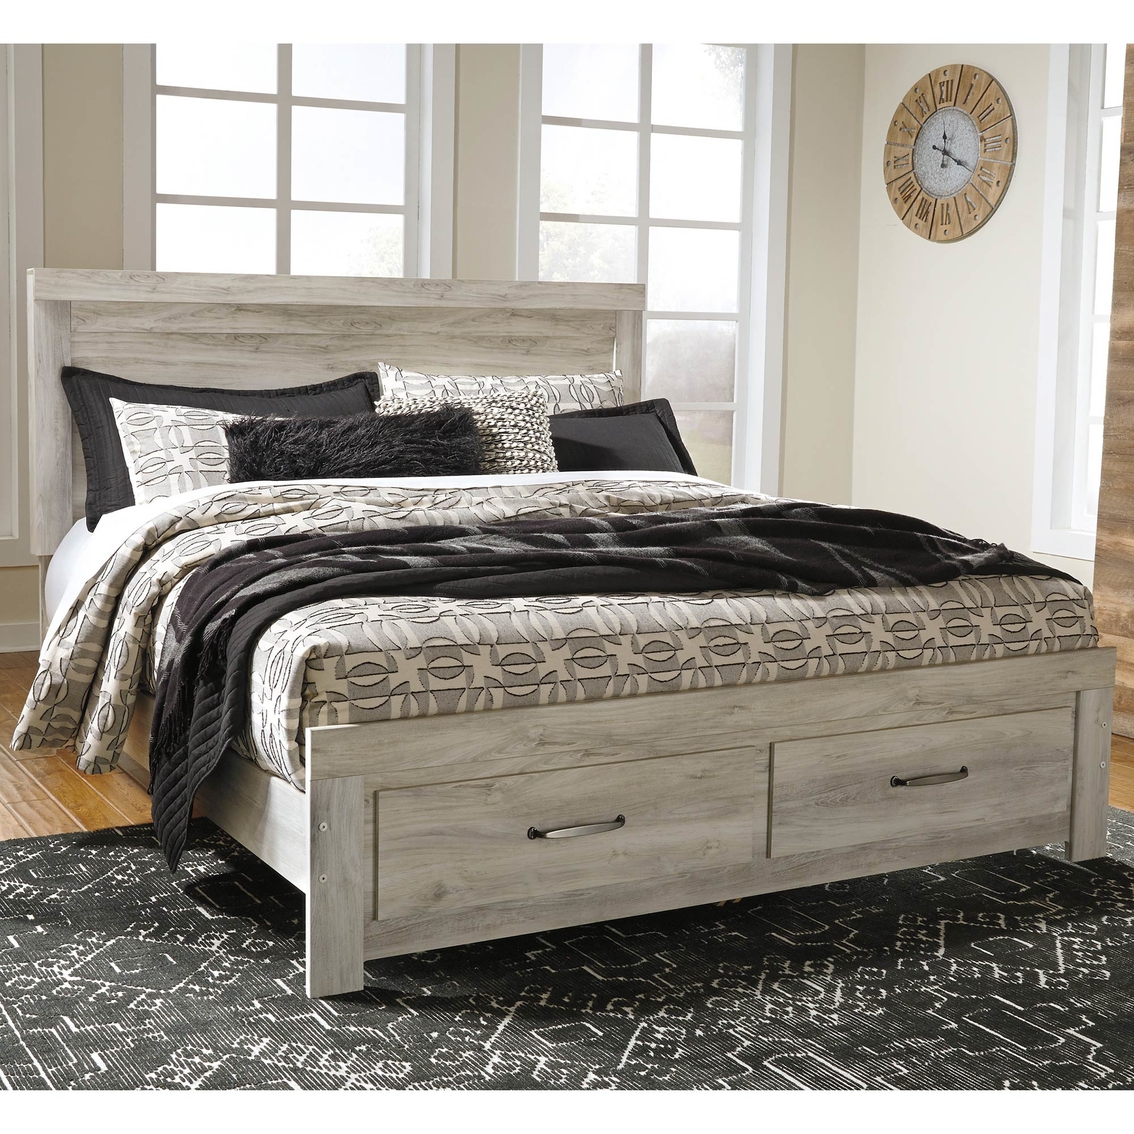 Signature Design by Ashley Bellaby Storage Bed - Image 2 of 4